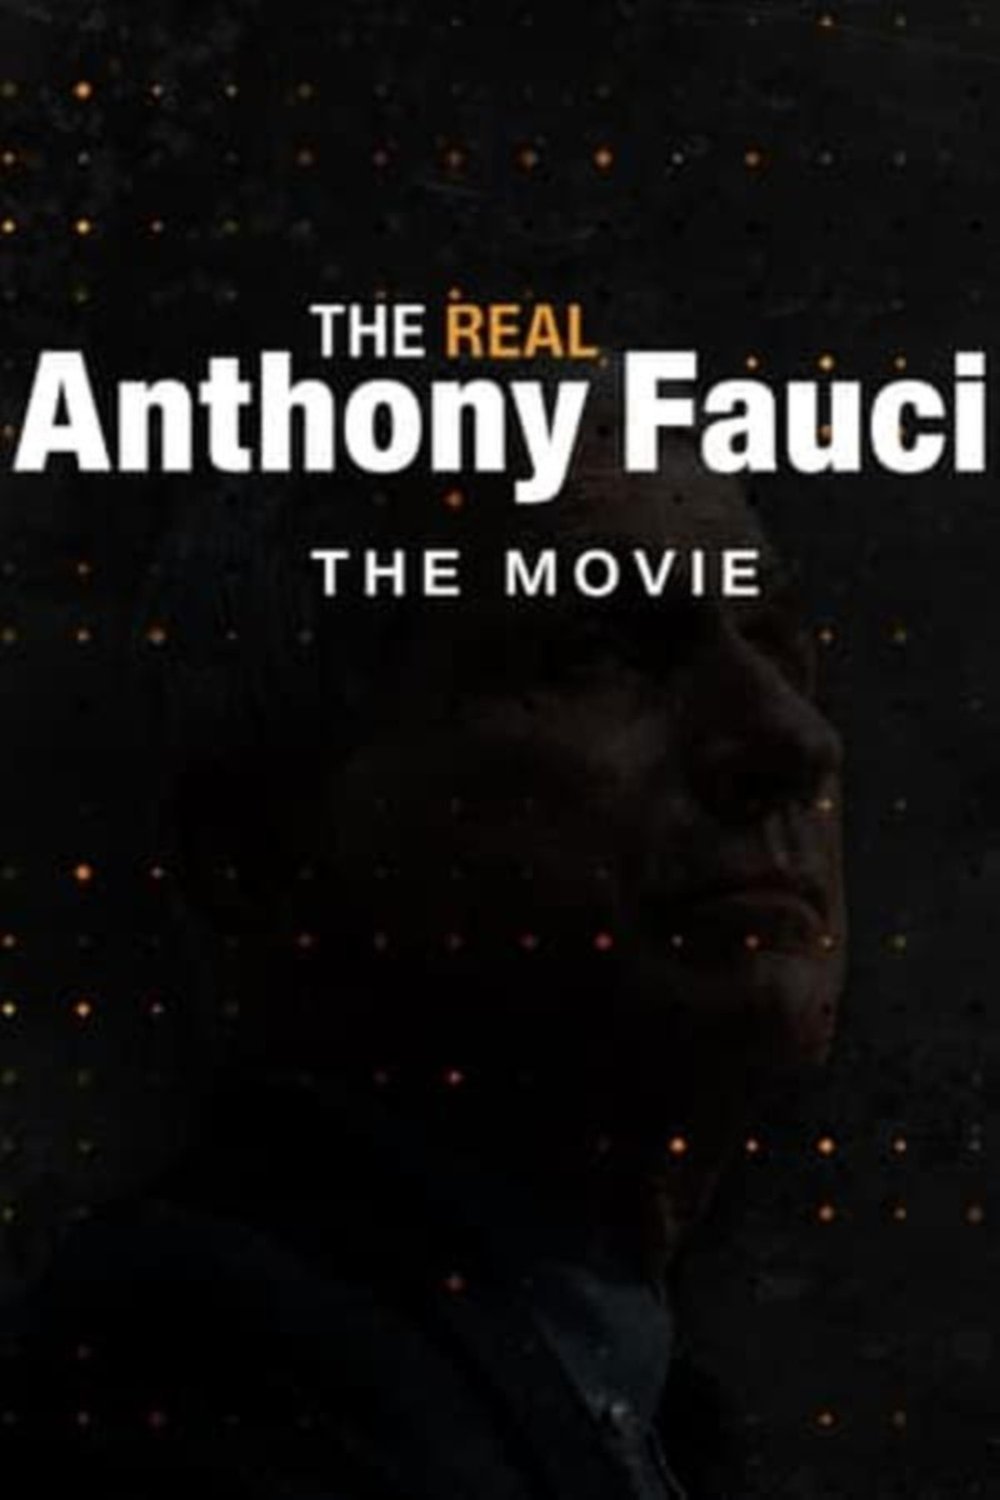 L'affiche du film The Real Anthony Fauci